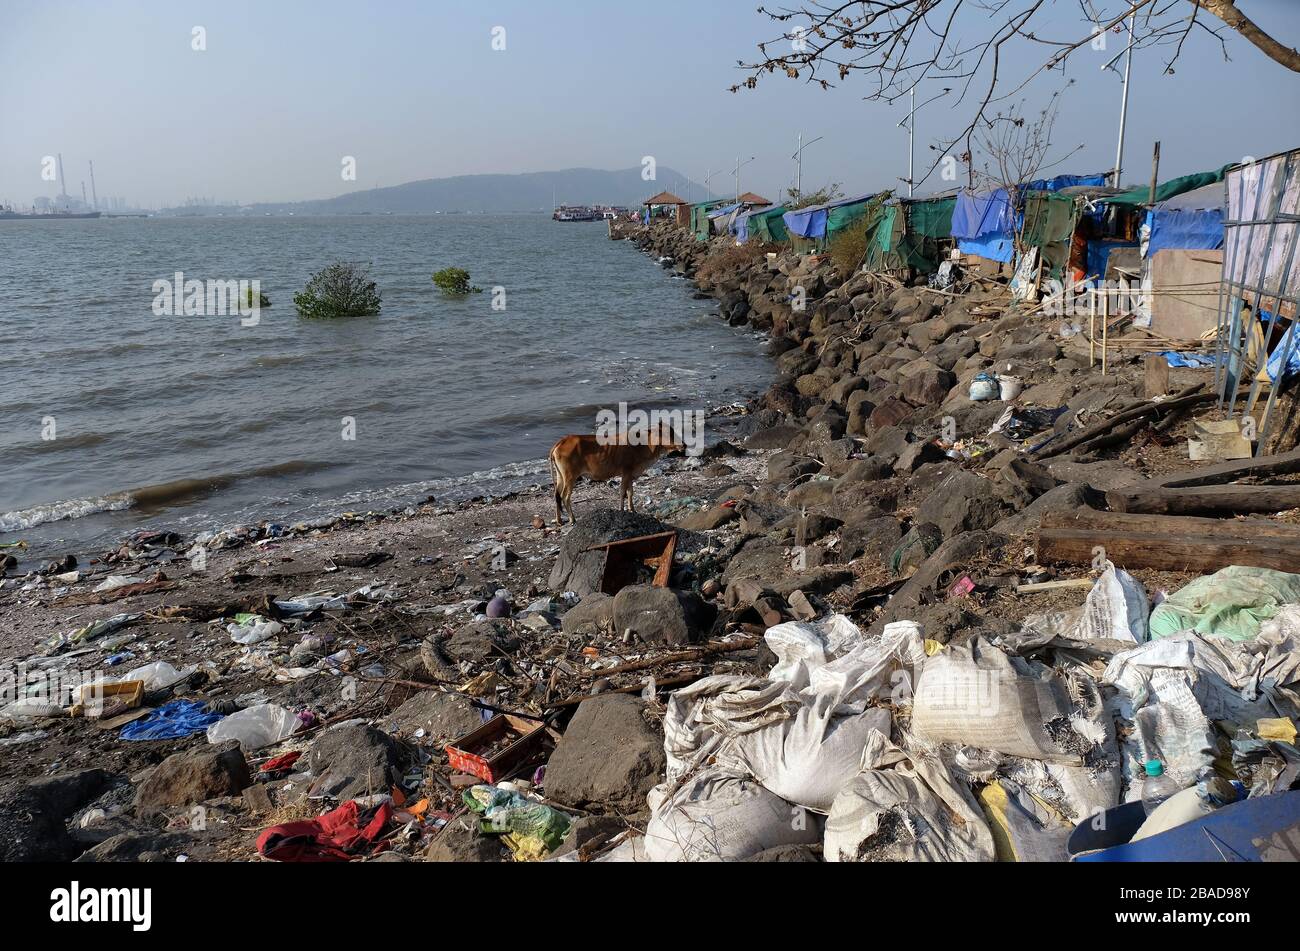 The cow is looking for food in the trash on the coast of Elephant Island near Mumbai, India Stock Photo